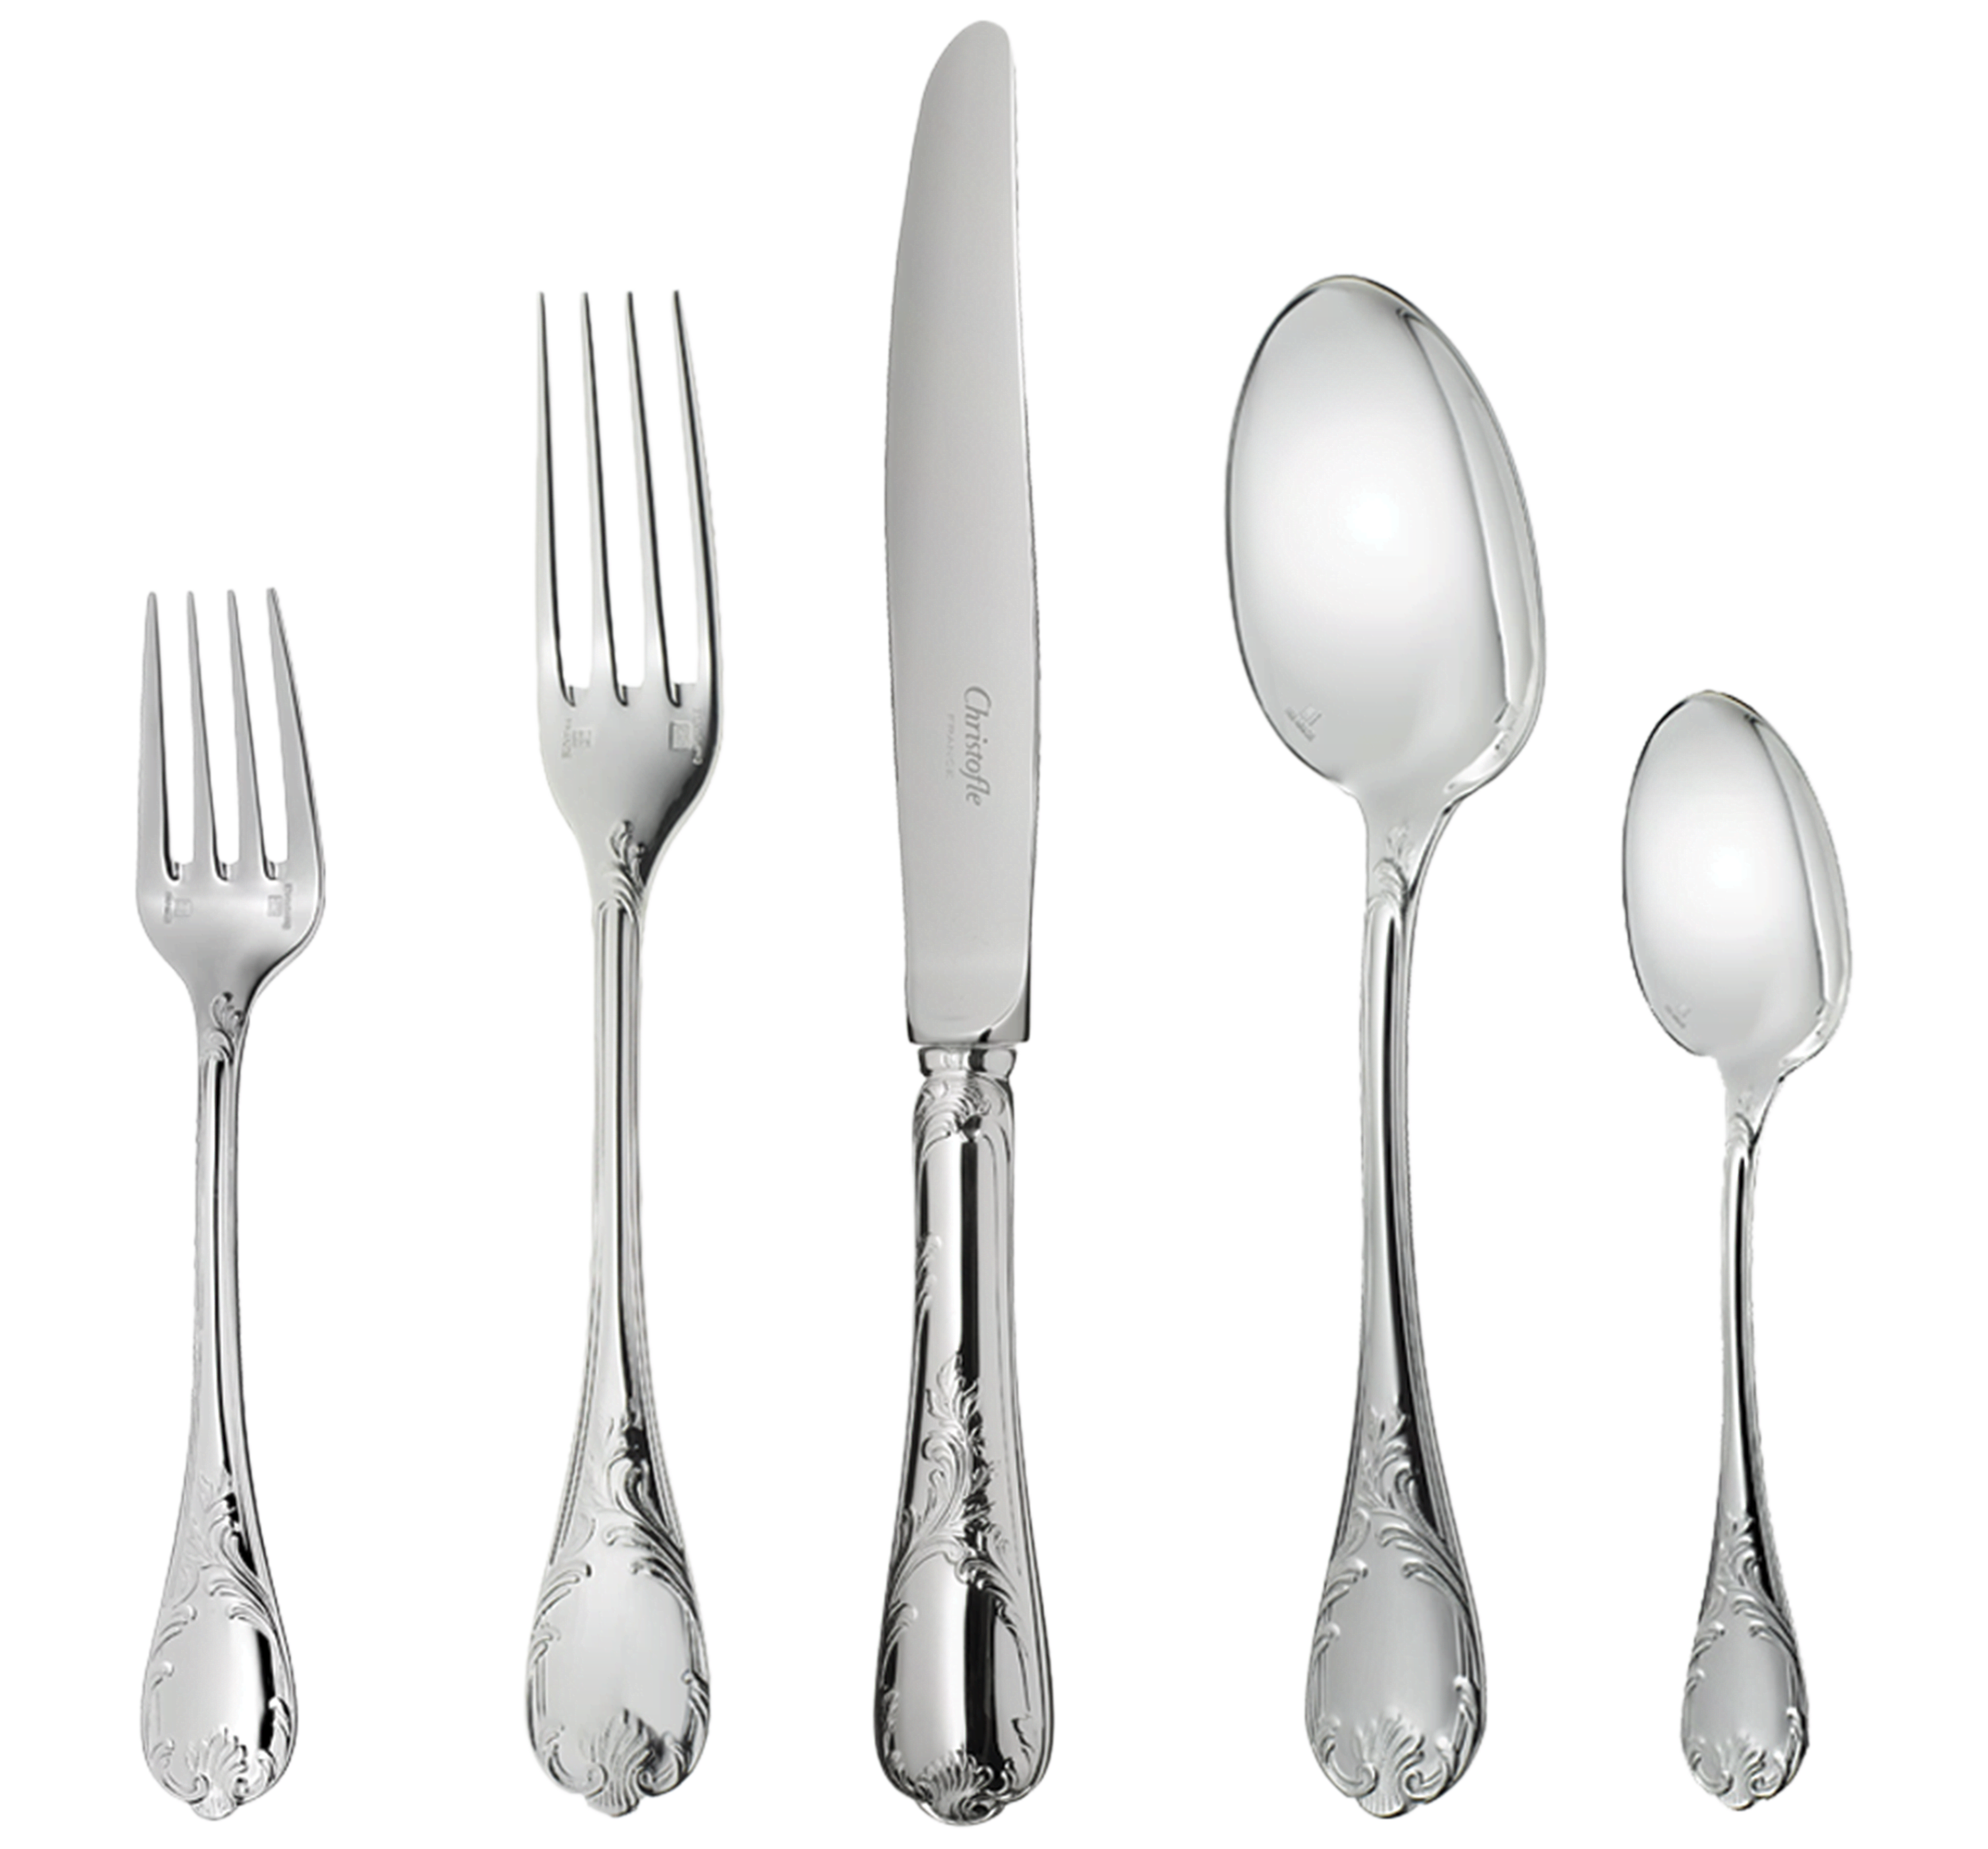 Christofle Silverplate Flatware Set in Marly Pattern 119 Pieces